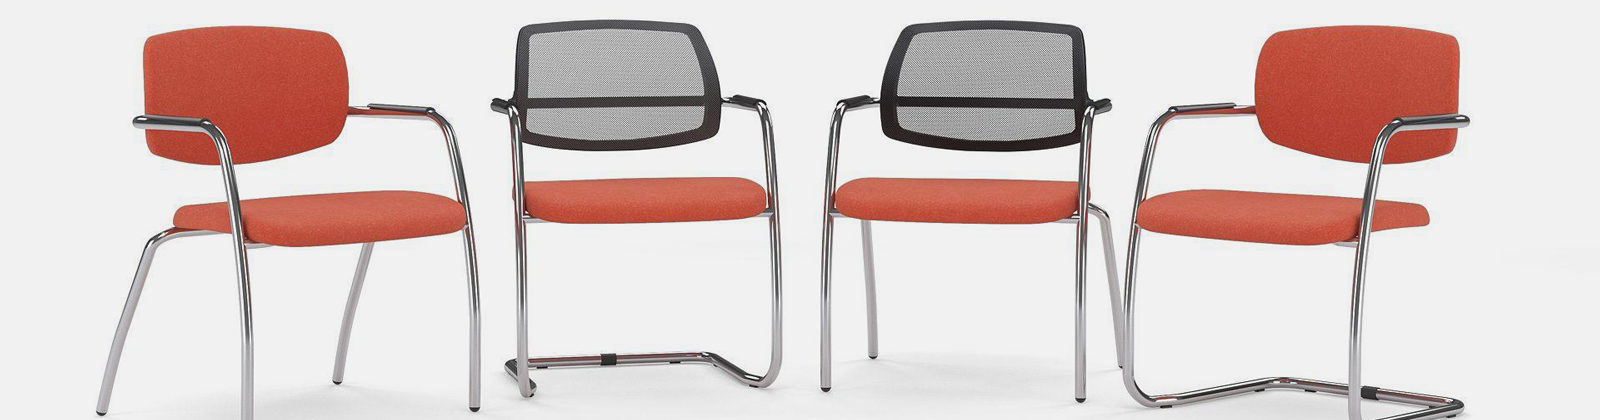 Gama meeting chair range with red fabric